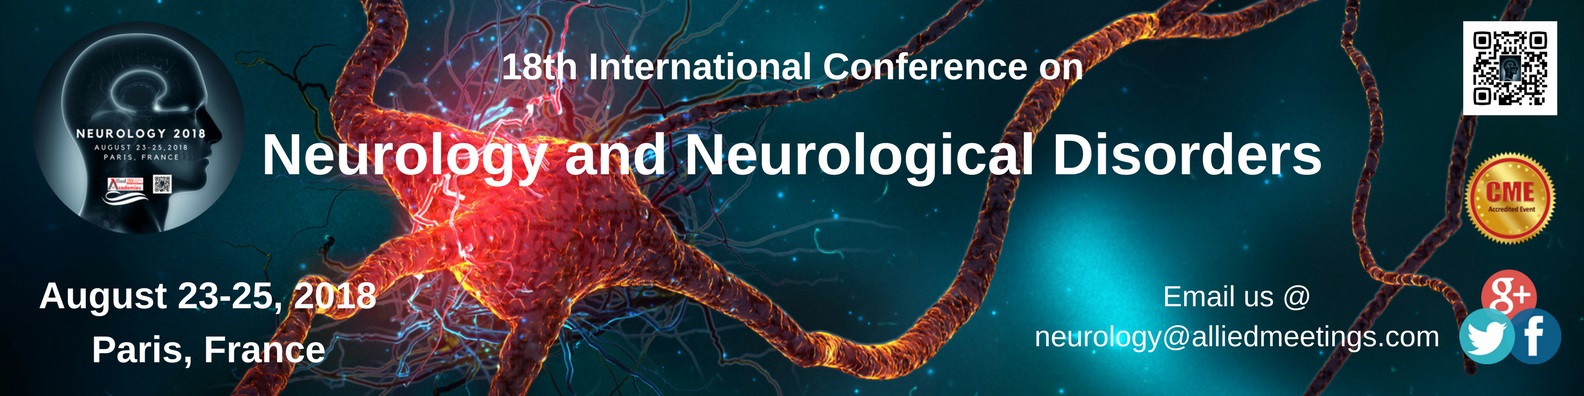 18th Int. Conf. on Neurology and Neurological Disorders